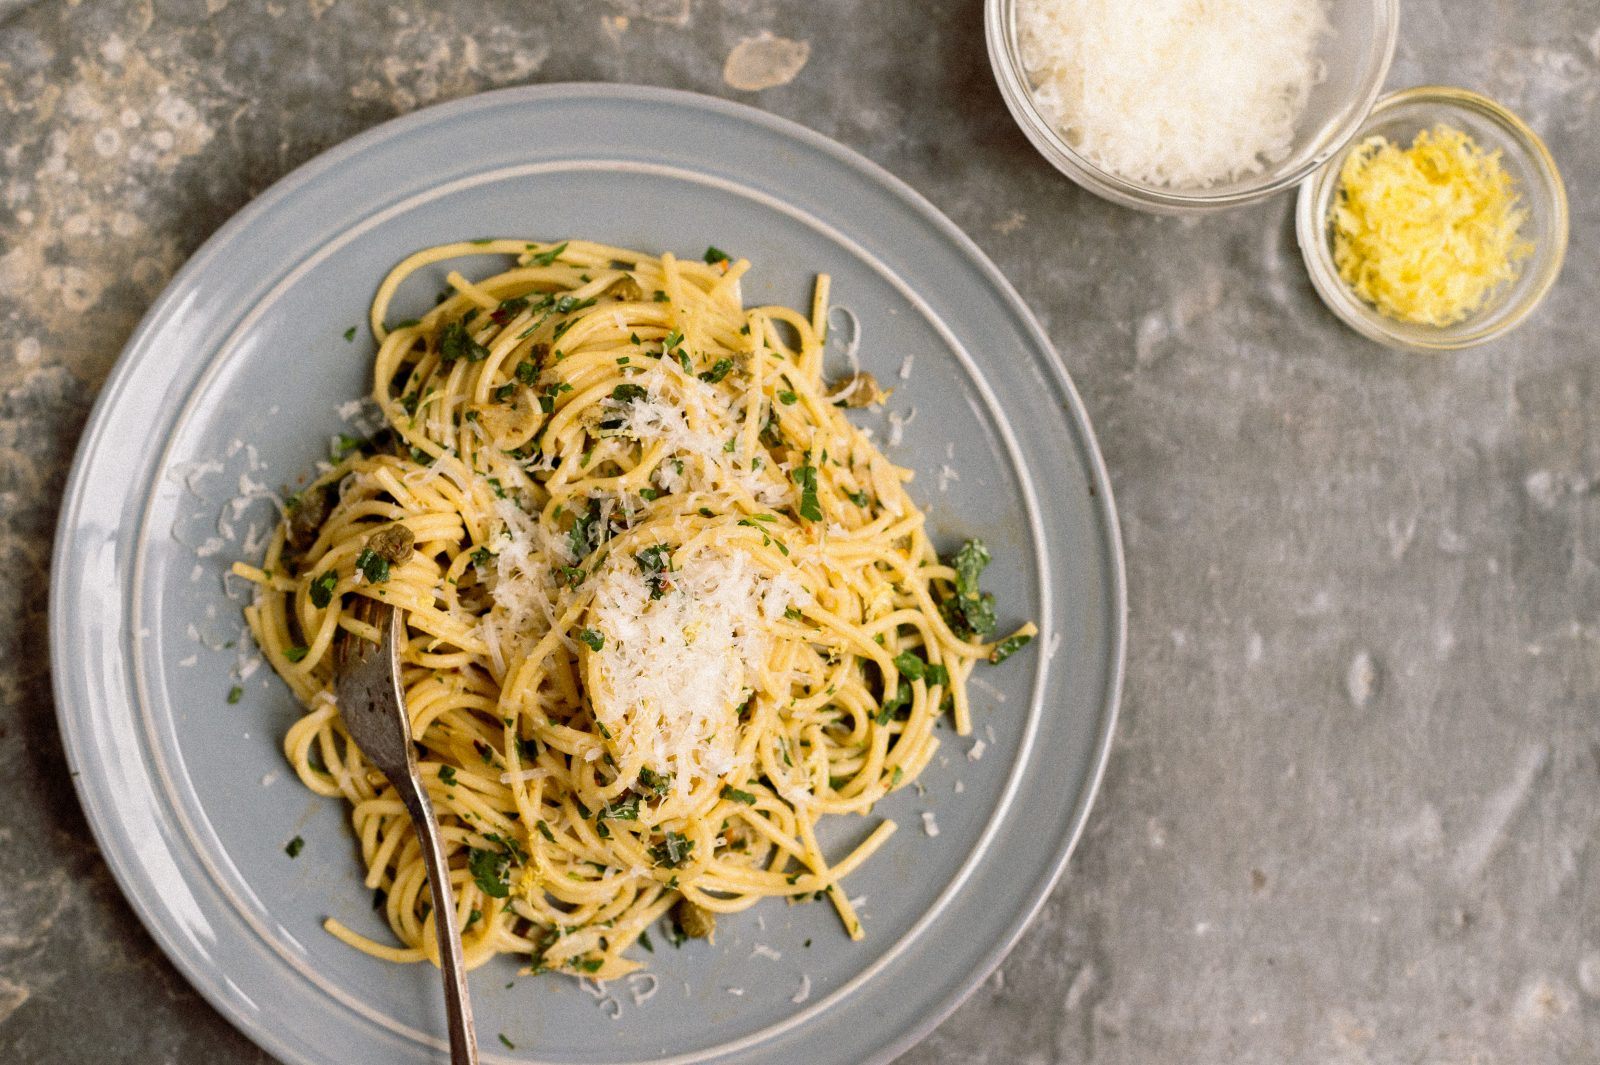 Spaghetti with Lemon, Anchovies, and Capers